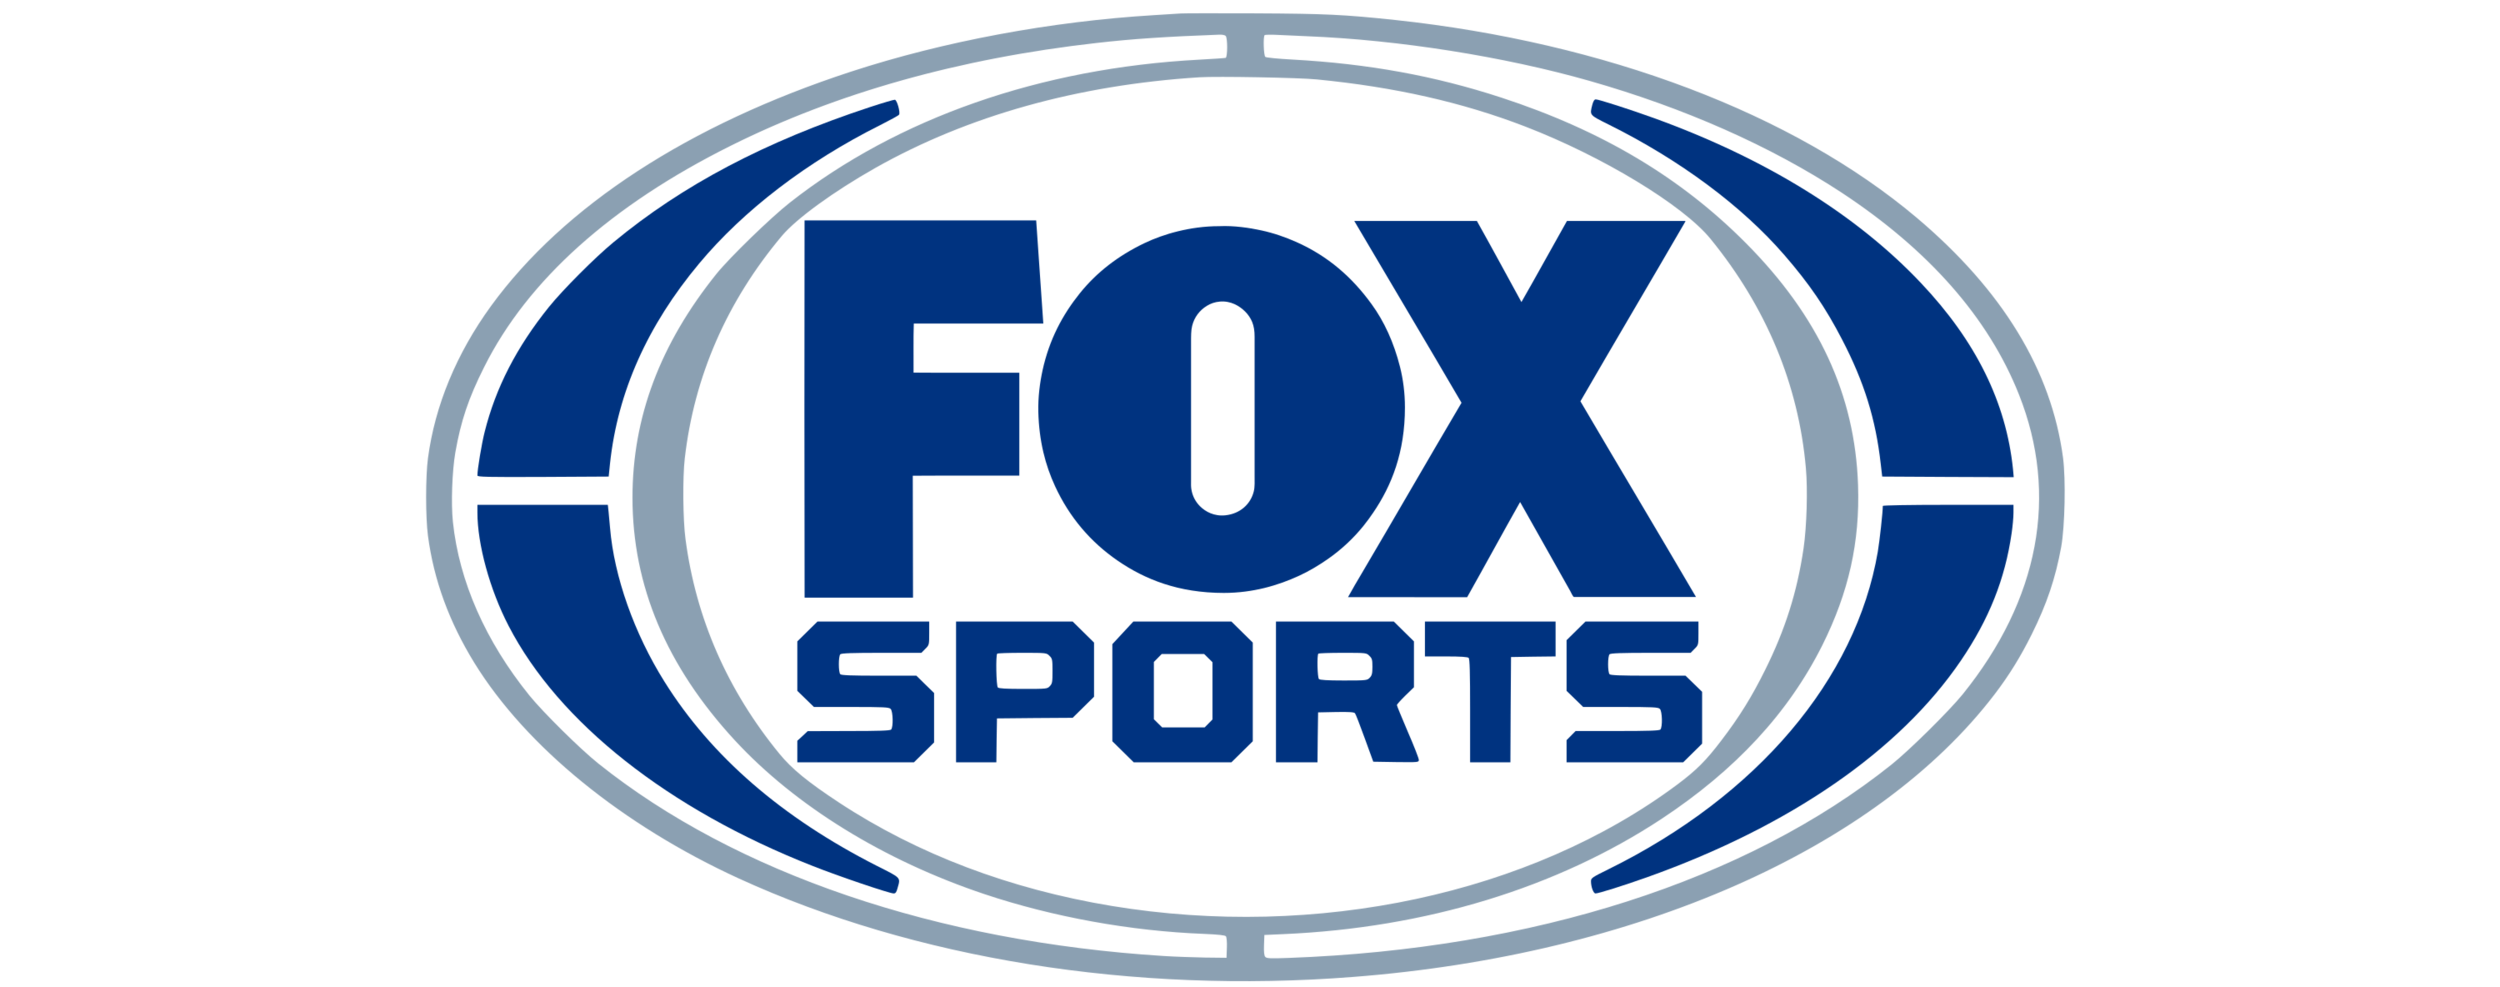 Fox Sports_resize.png